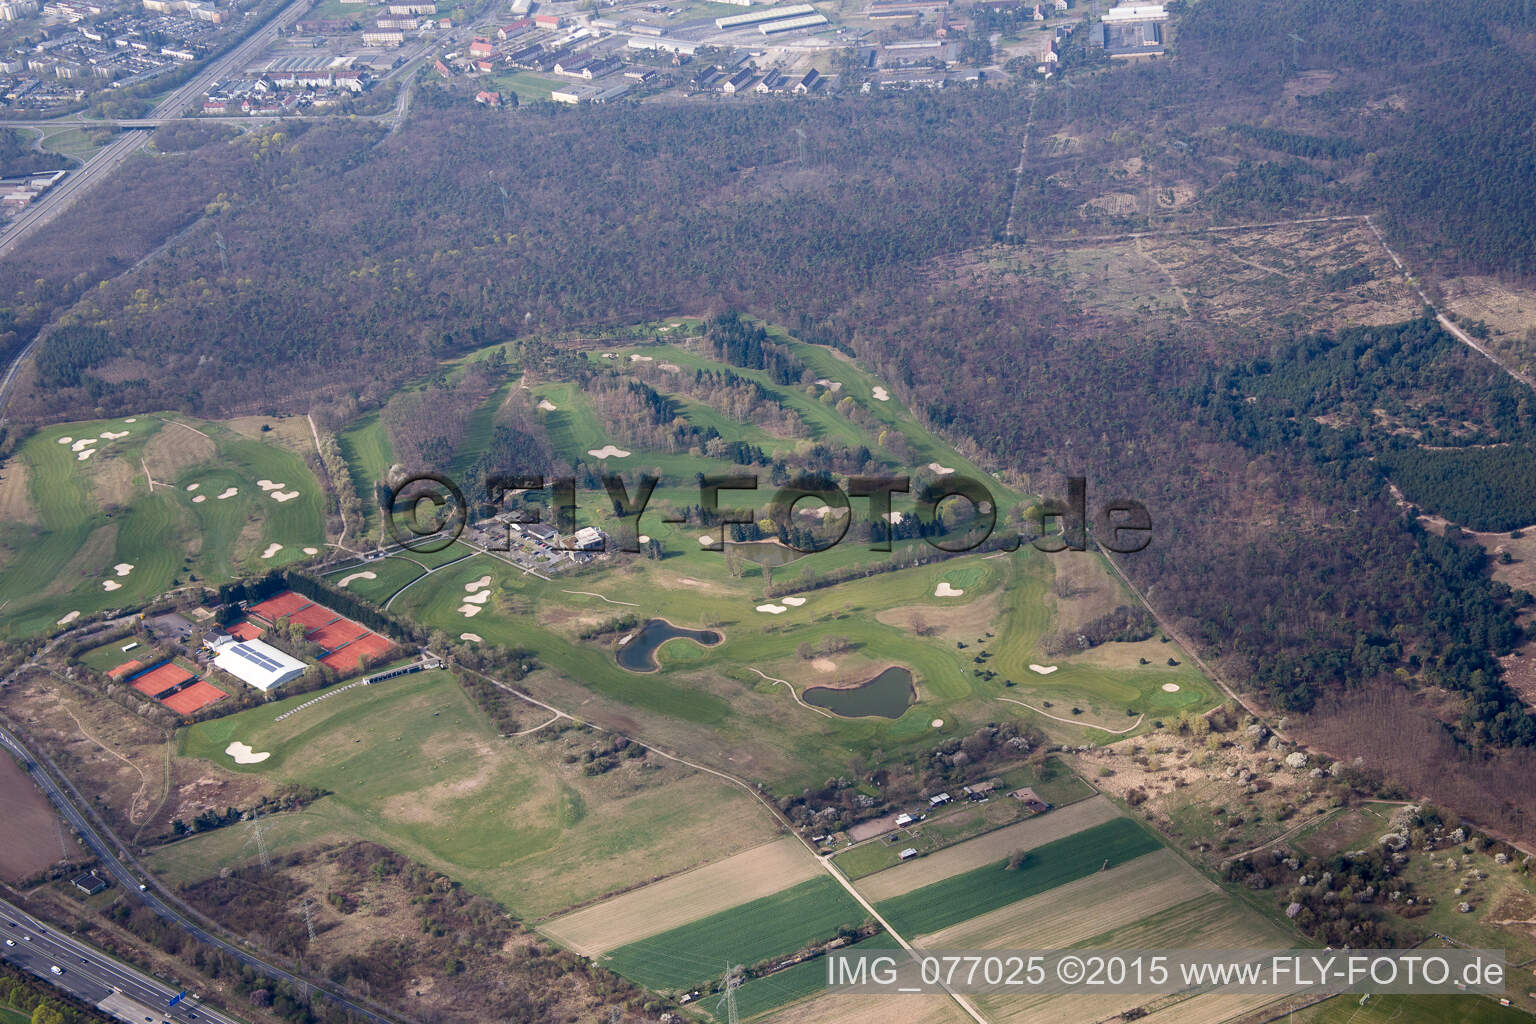 Aerial photograpy of Grounds of the Golf course at of Golf Club Mannheim-Viernheim 1930 e.V. in Viernheim in the state Hesse, Germany